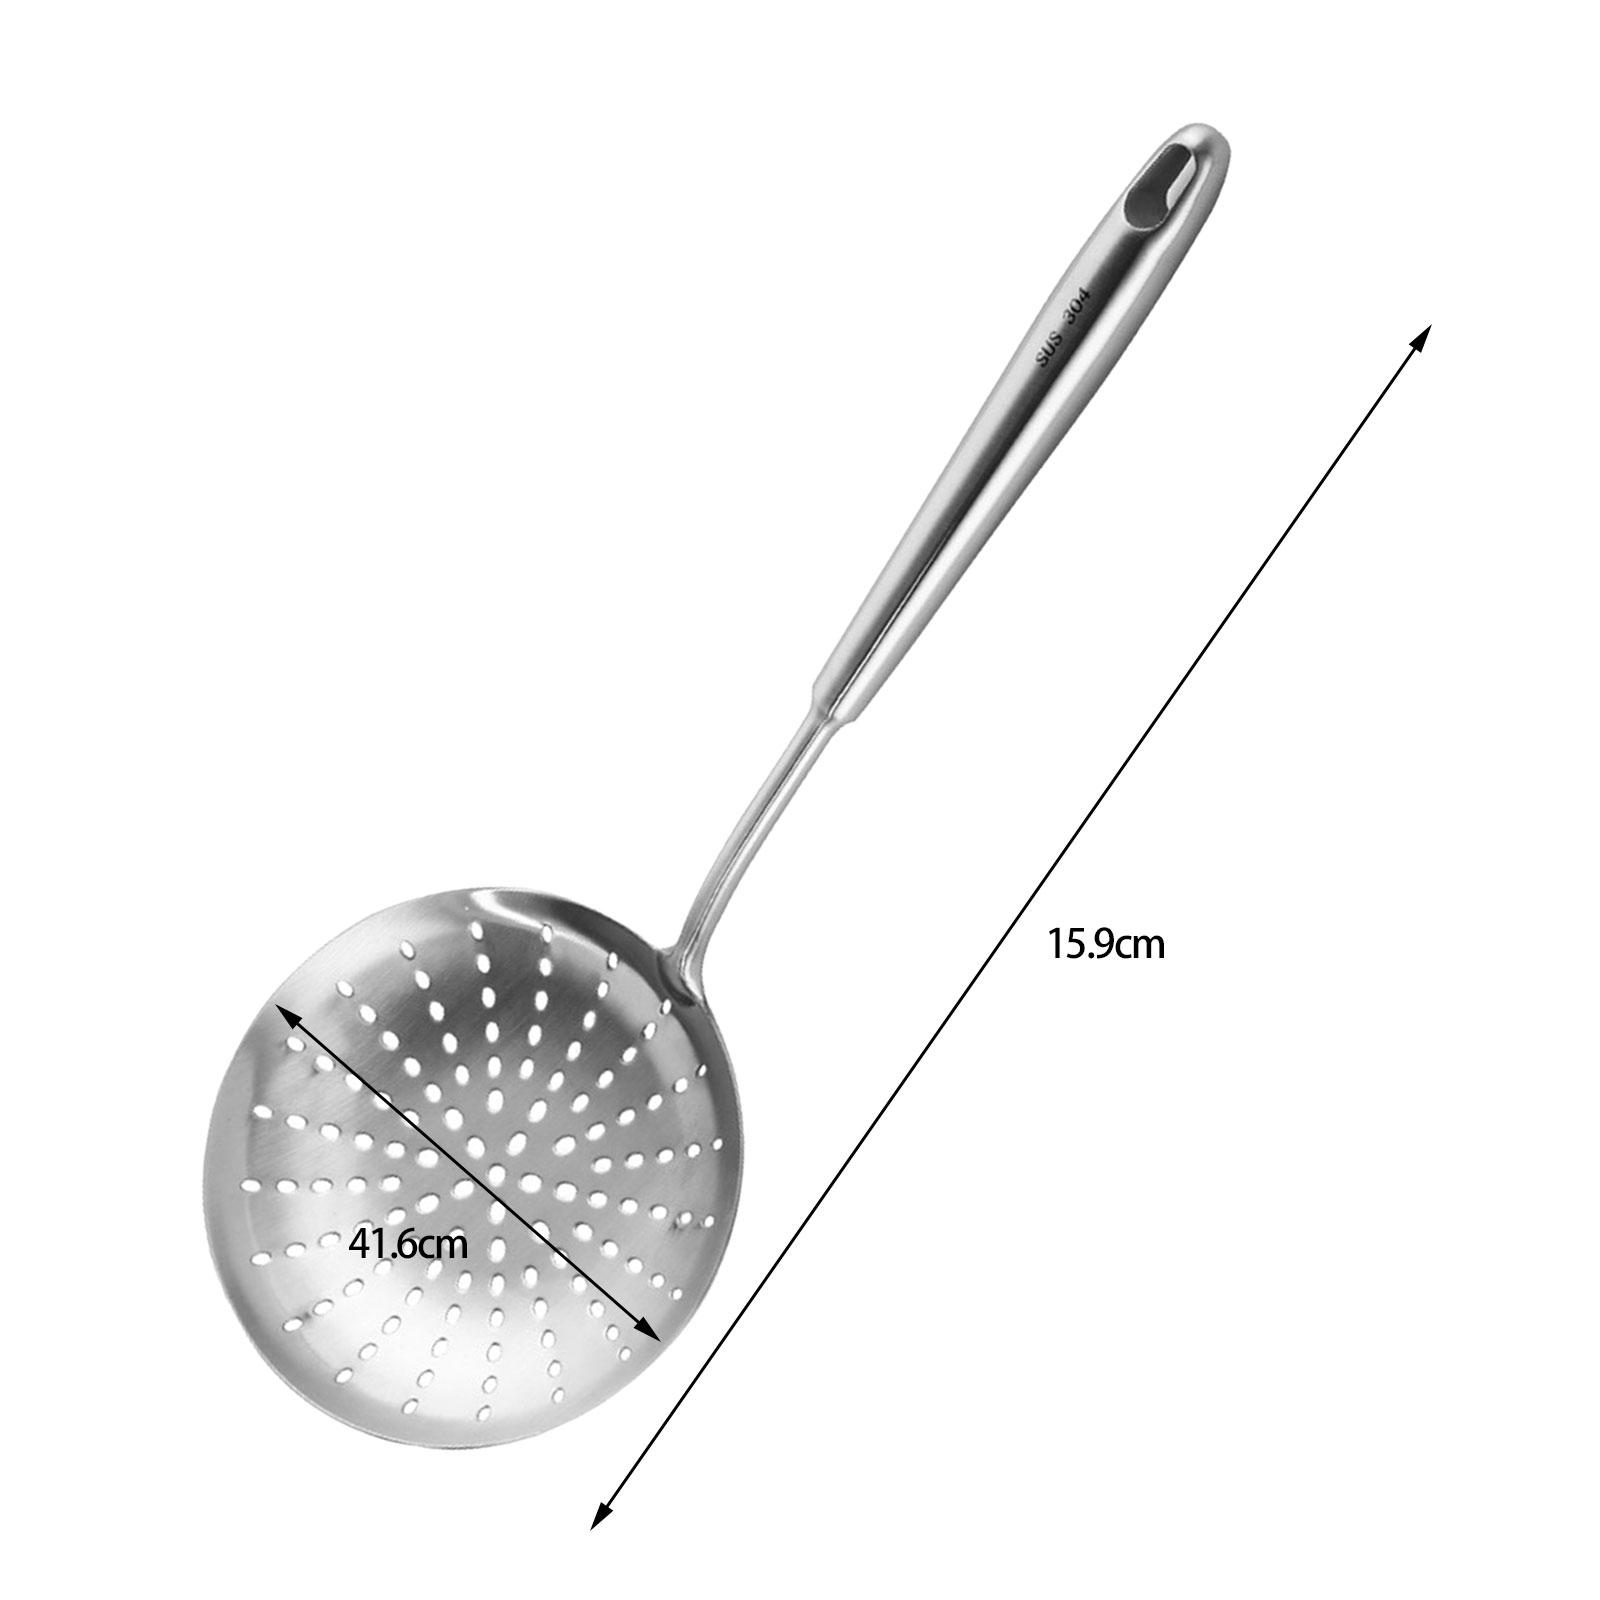 Skimmer Slotted Spoon Stainless Steel Deep Frying Skimmer Spoon for Scooping - image 5 of 9